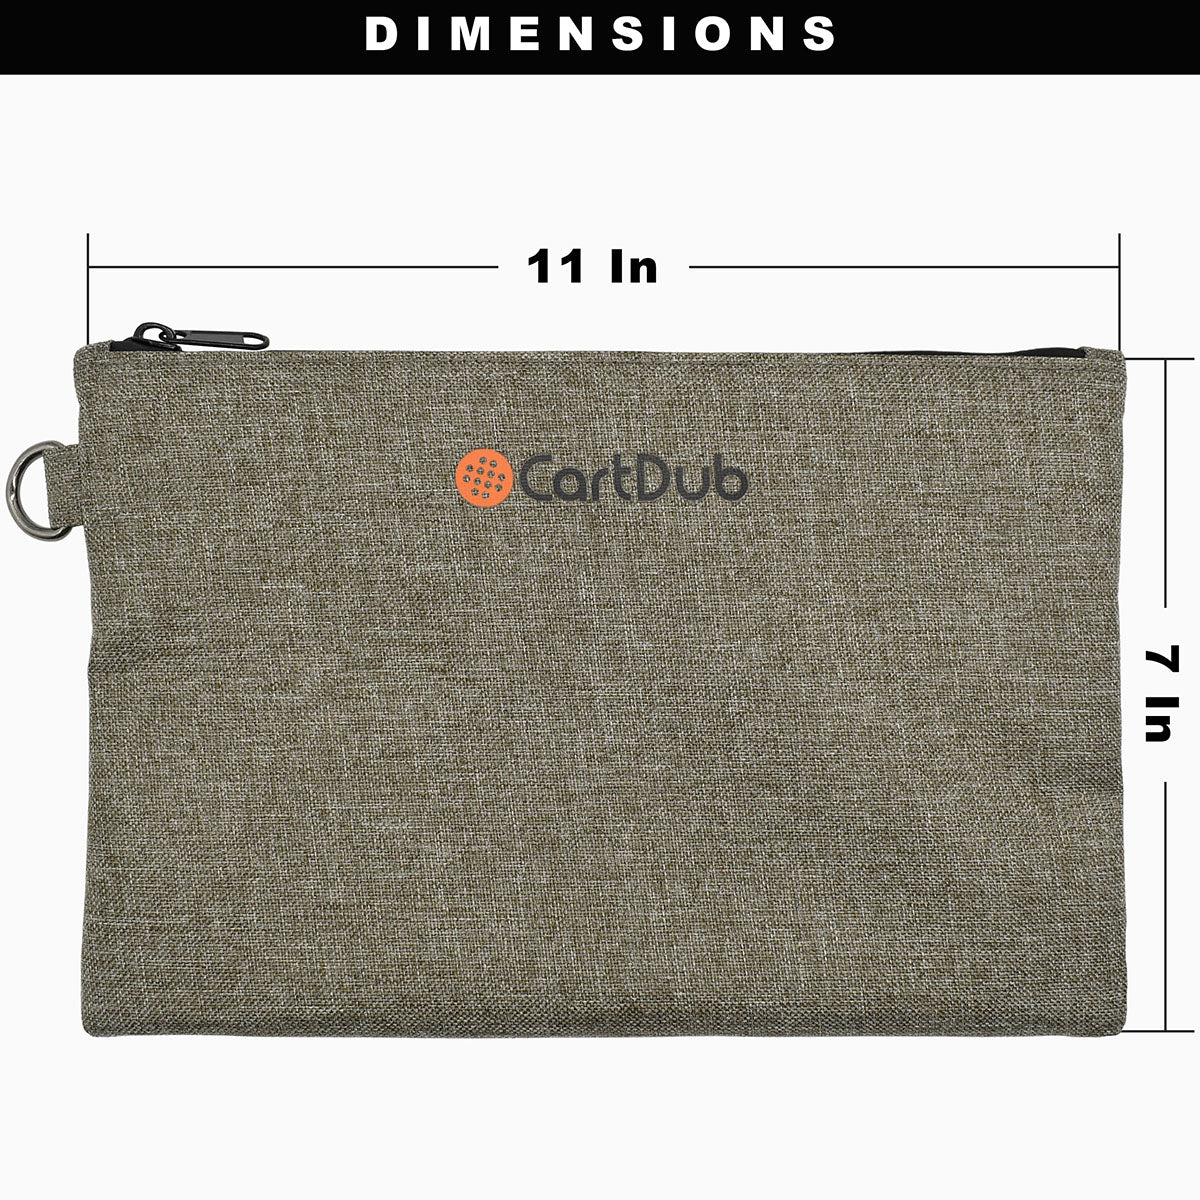 Dimensions of the Large Smell Proof Pouch